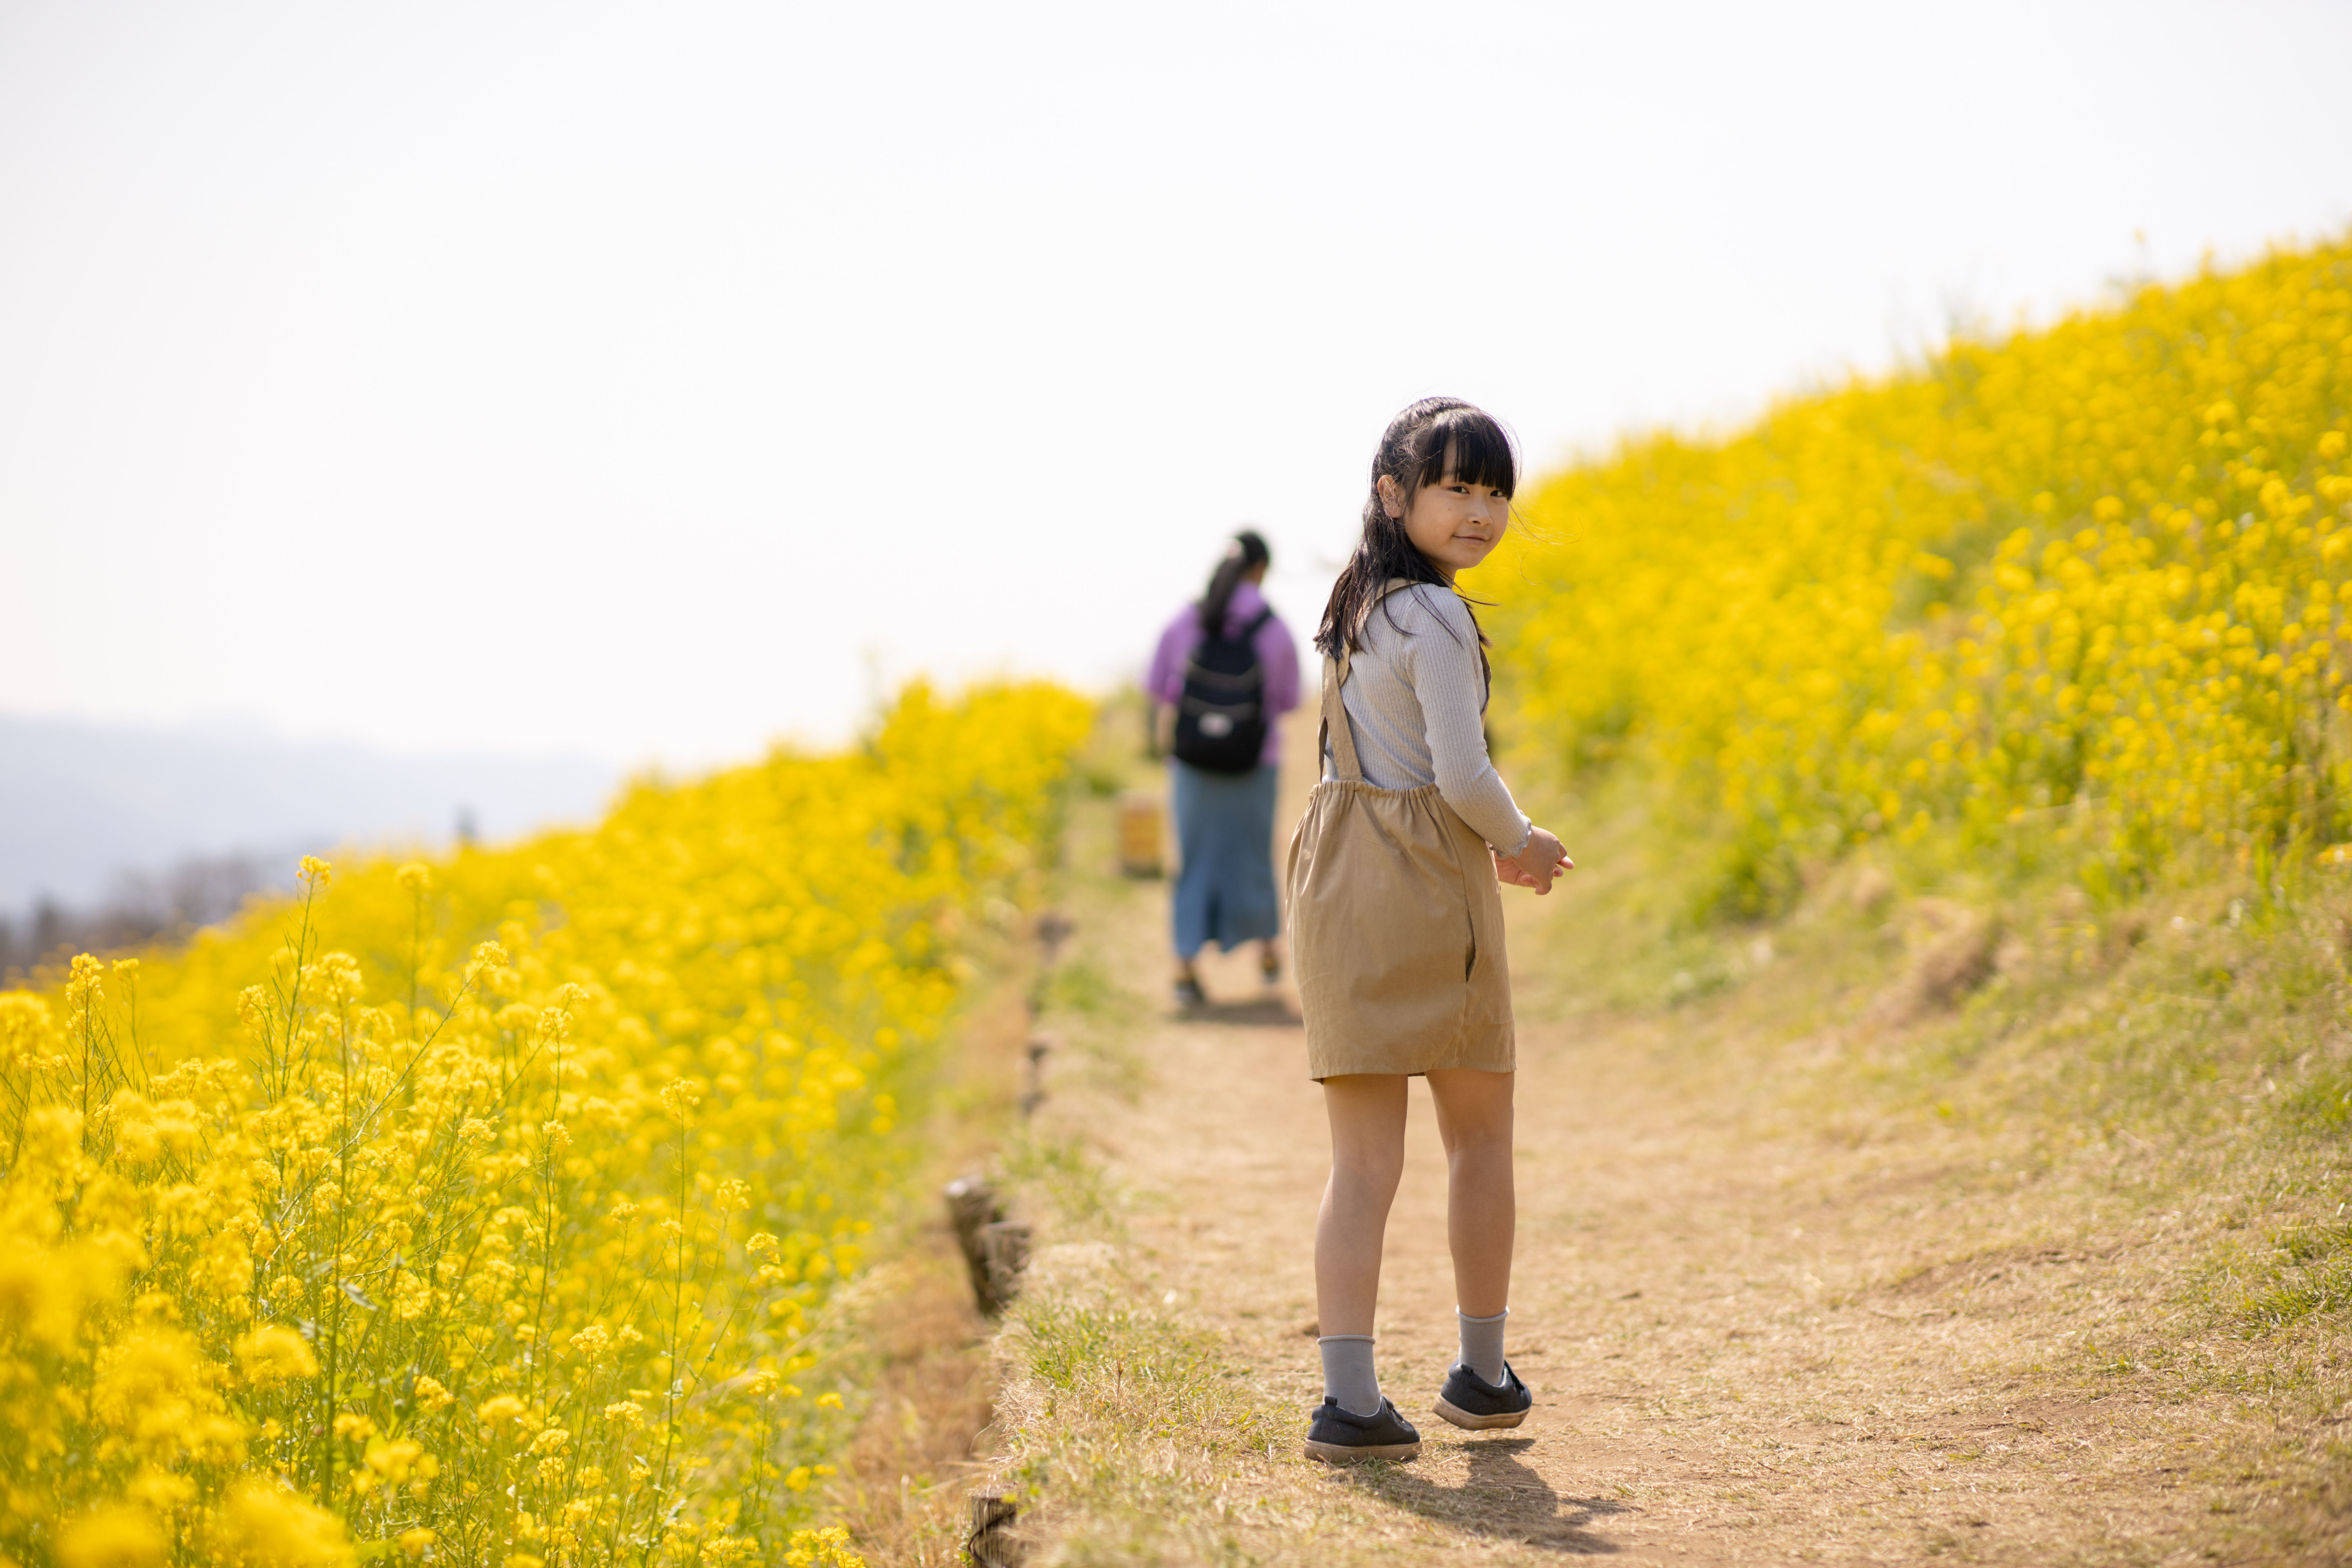 Young girl on wildflower trail